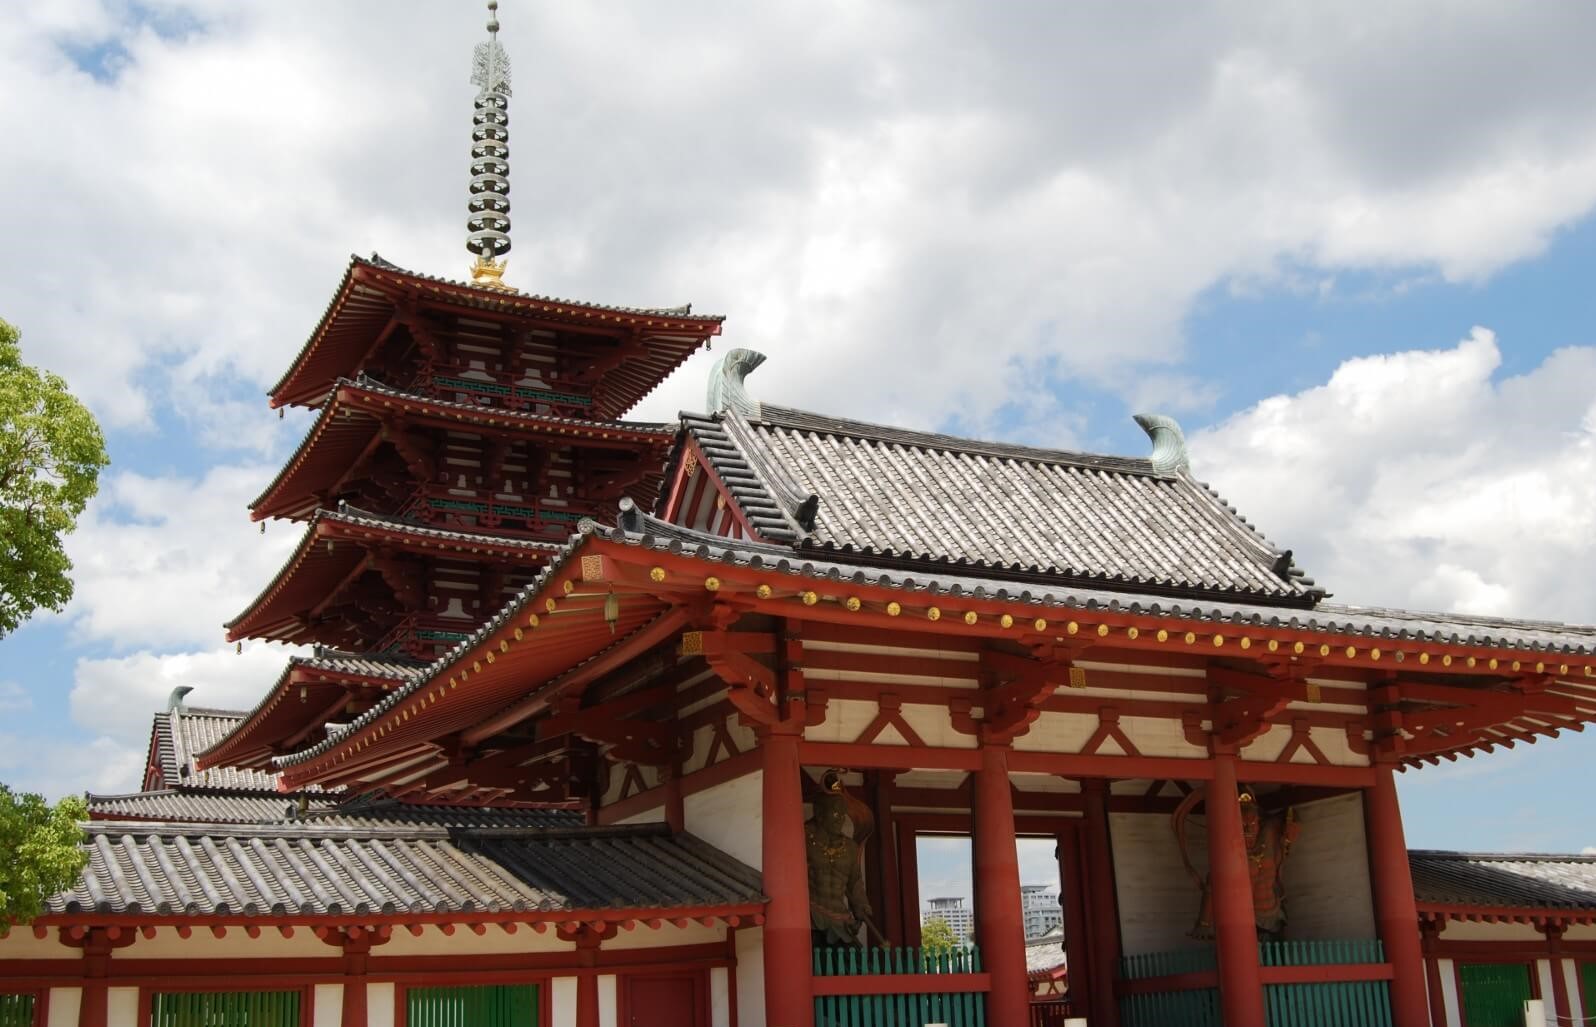 The 5-story pagoda and the middle gate of Shitennoji Temple